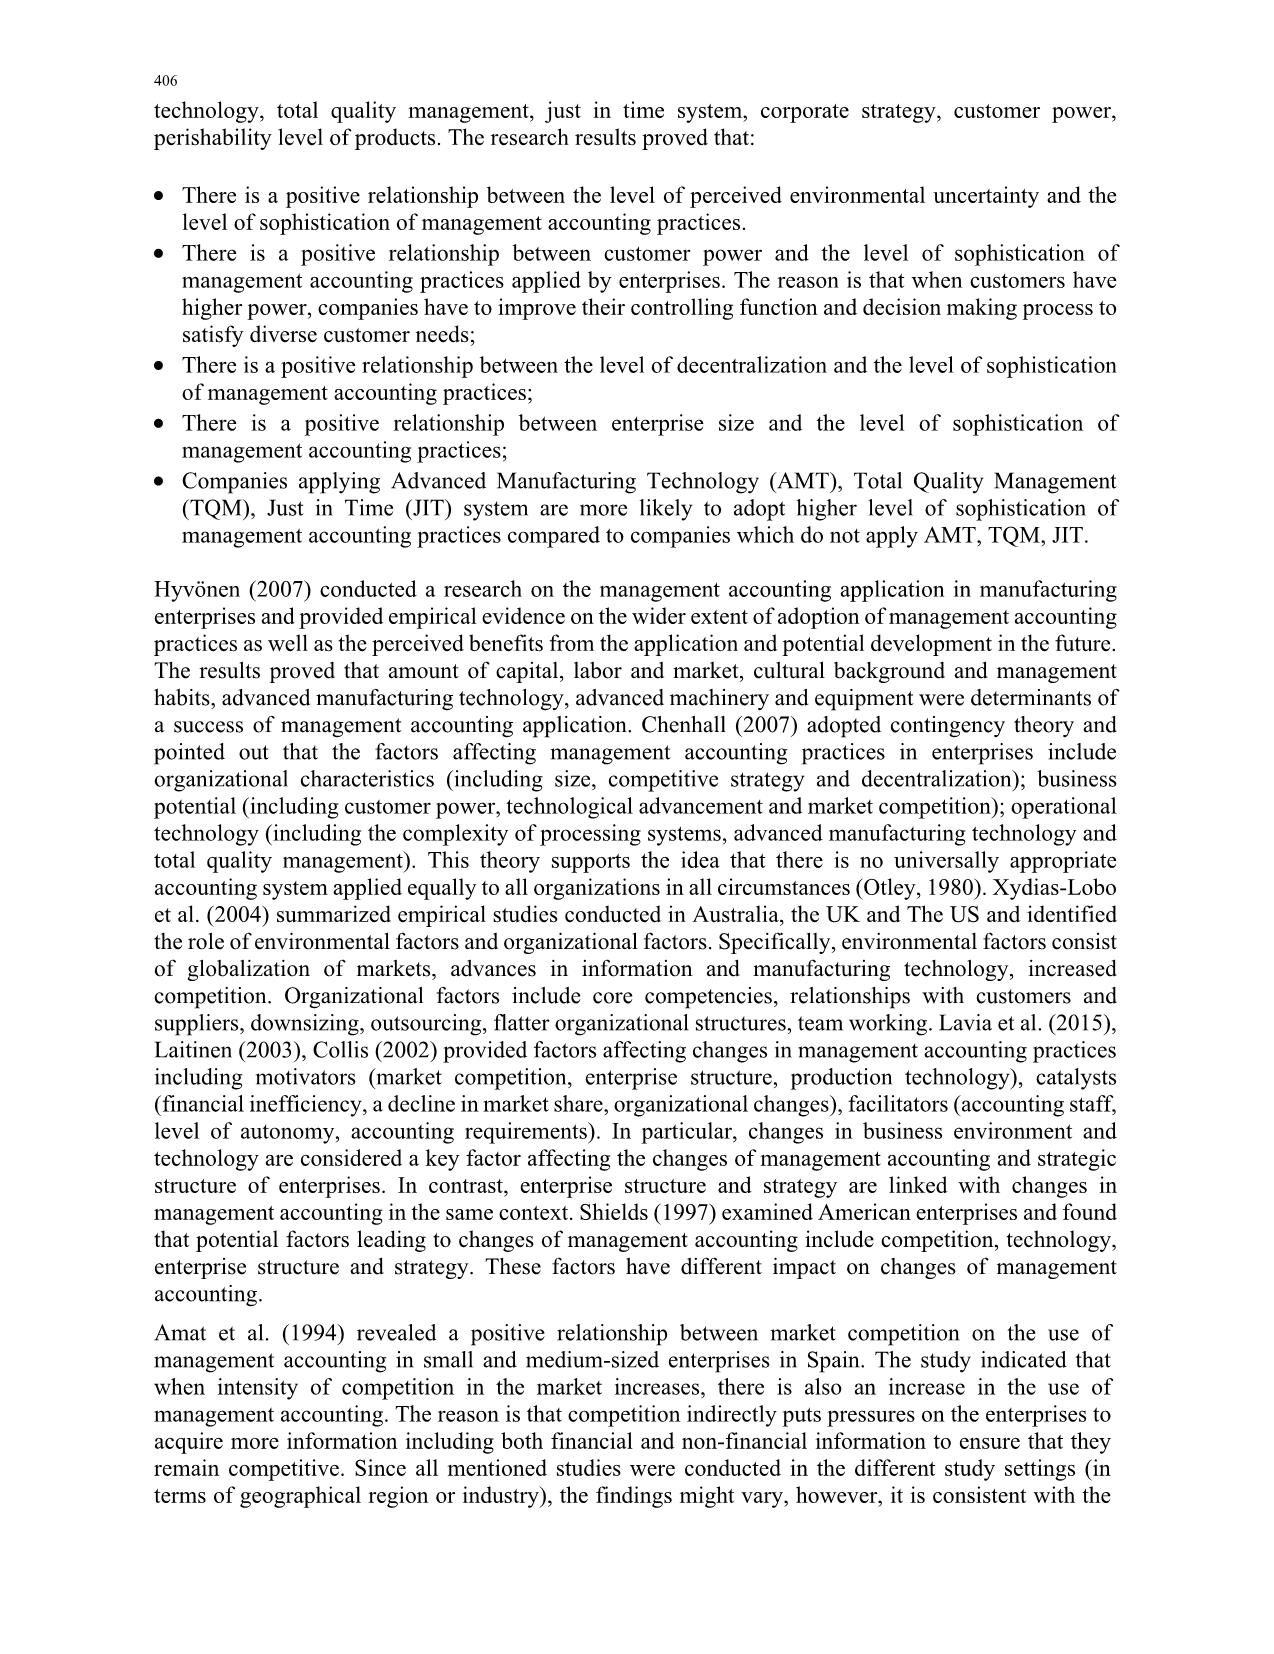 Factors affecting the application of management accounting in Vietnamese enterprises trang 4